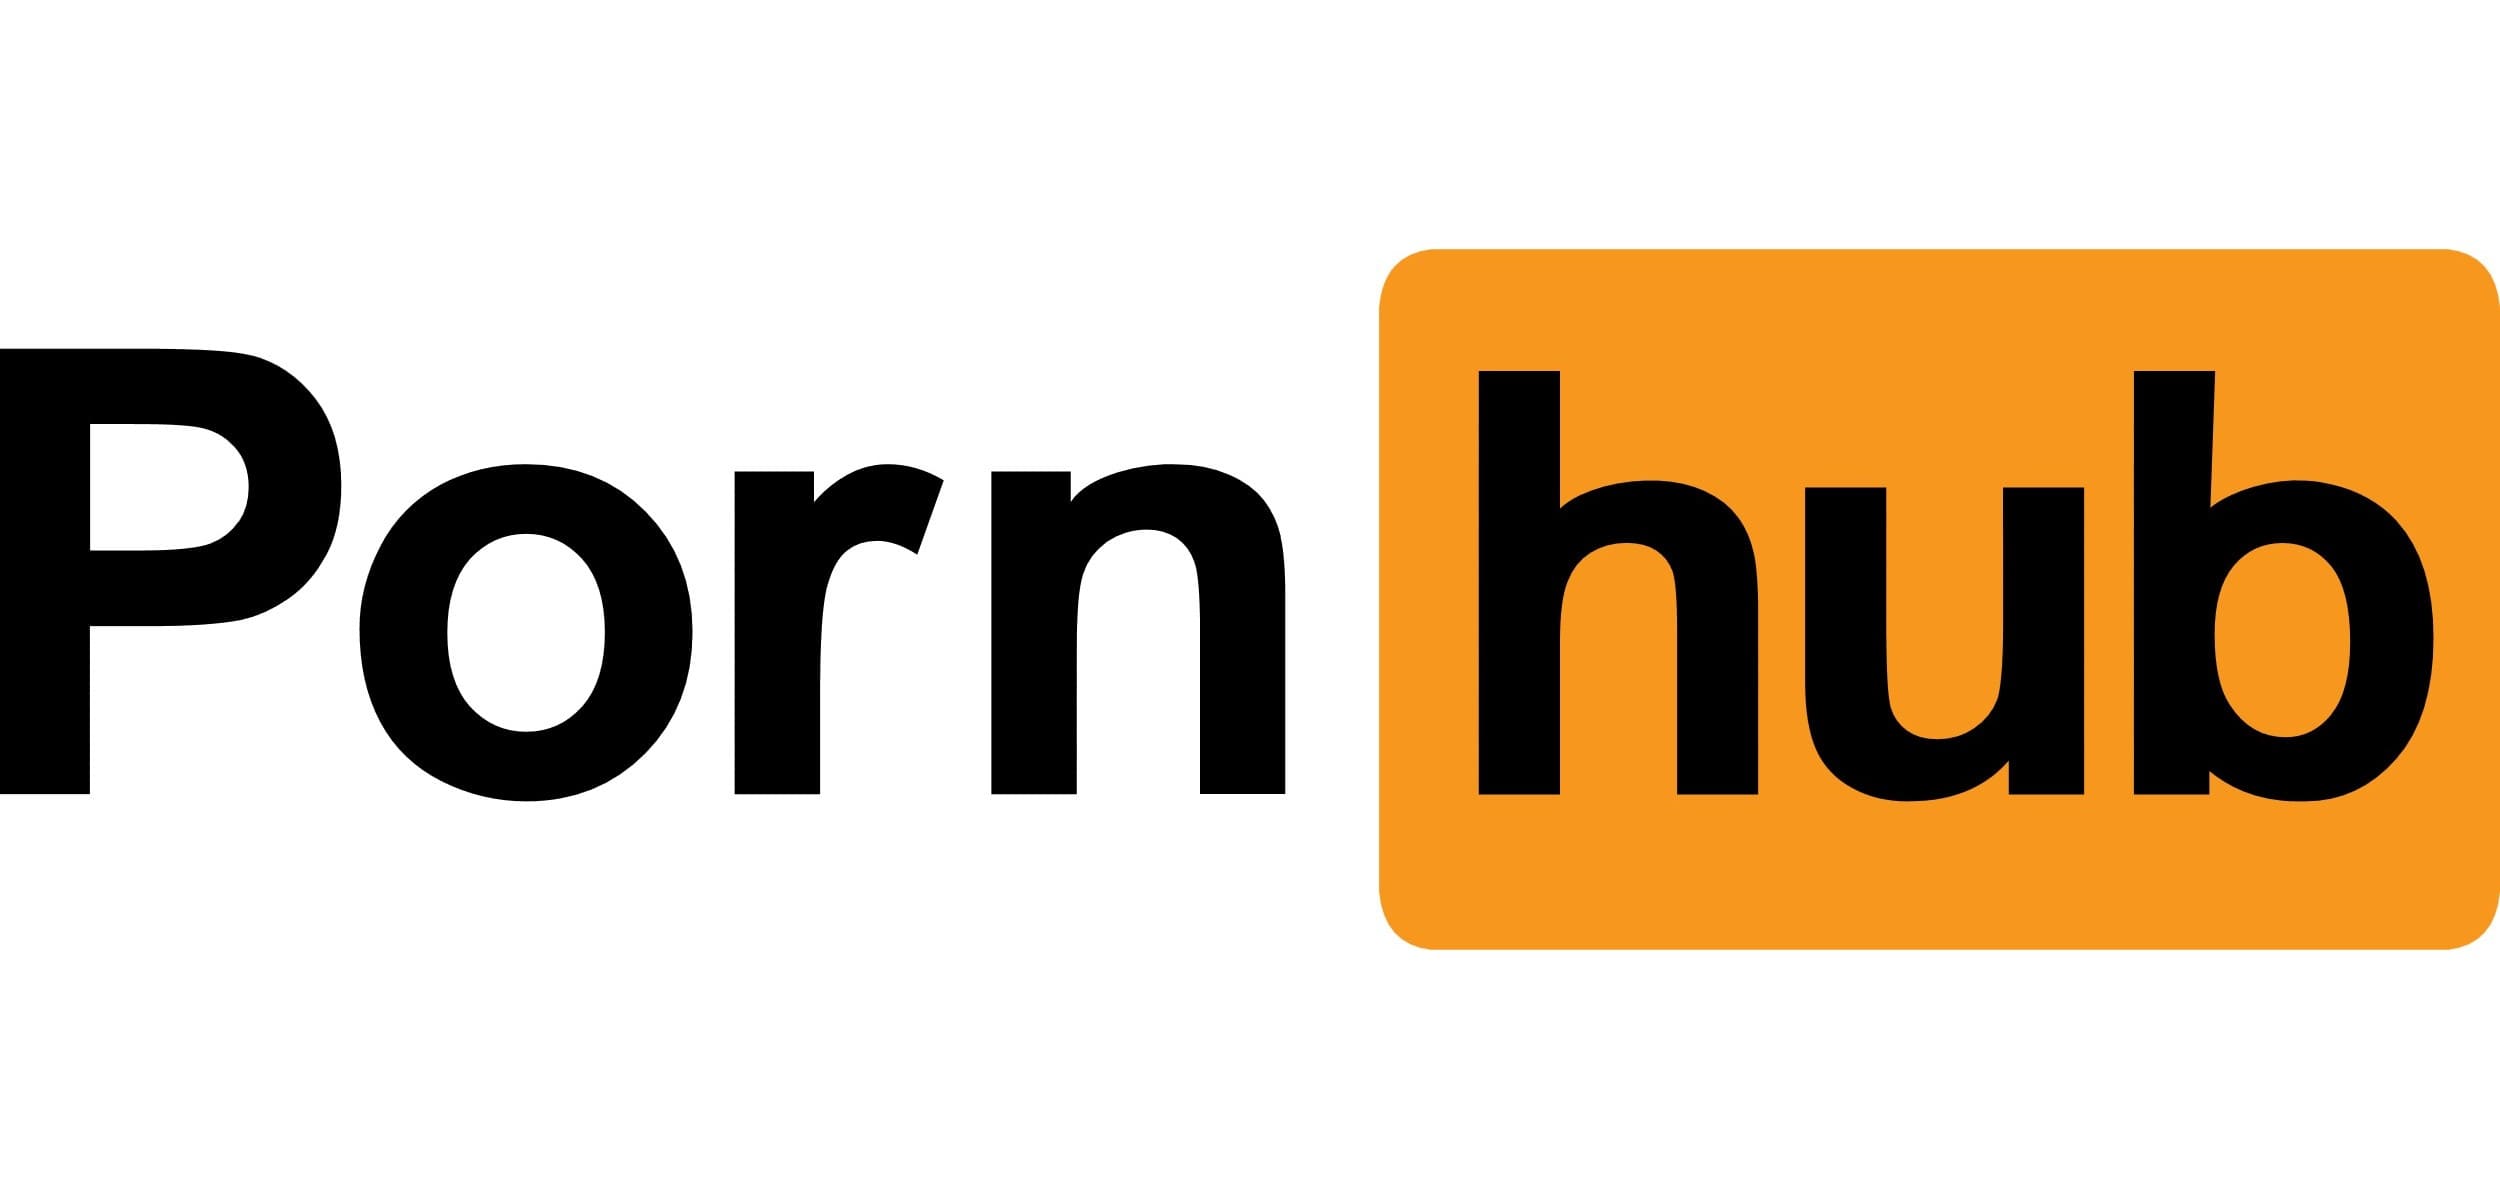 carter simpson recommends download pornhub paid videos pic